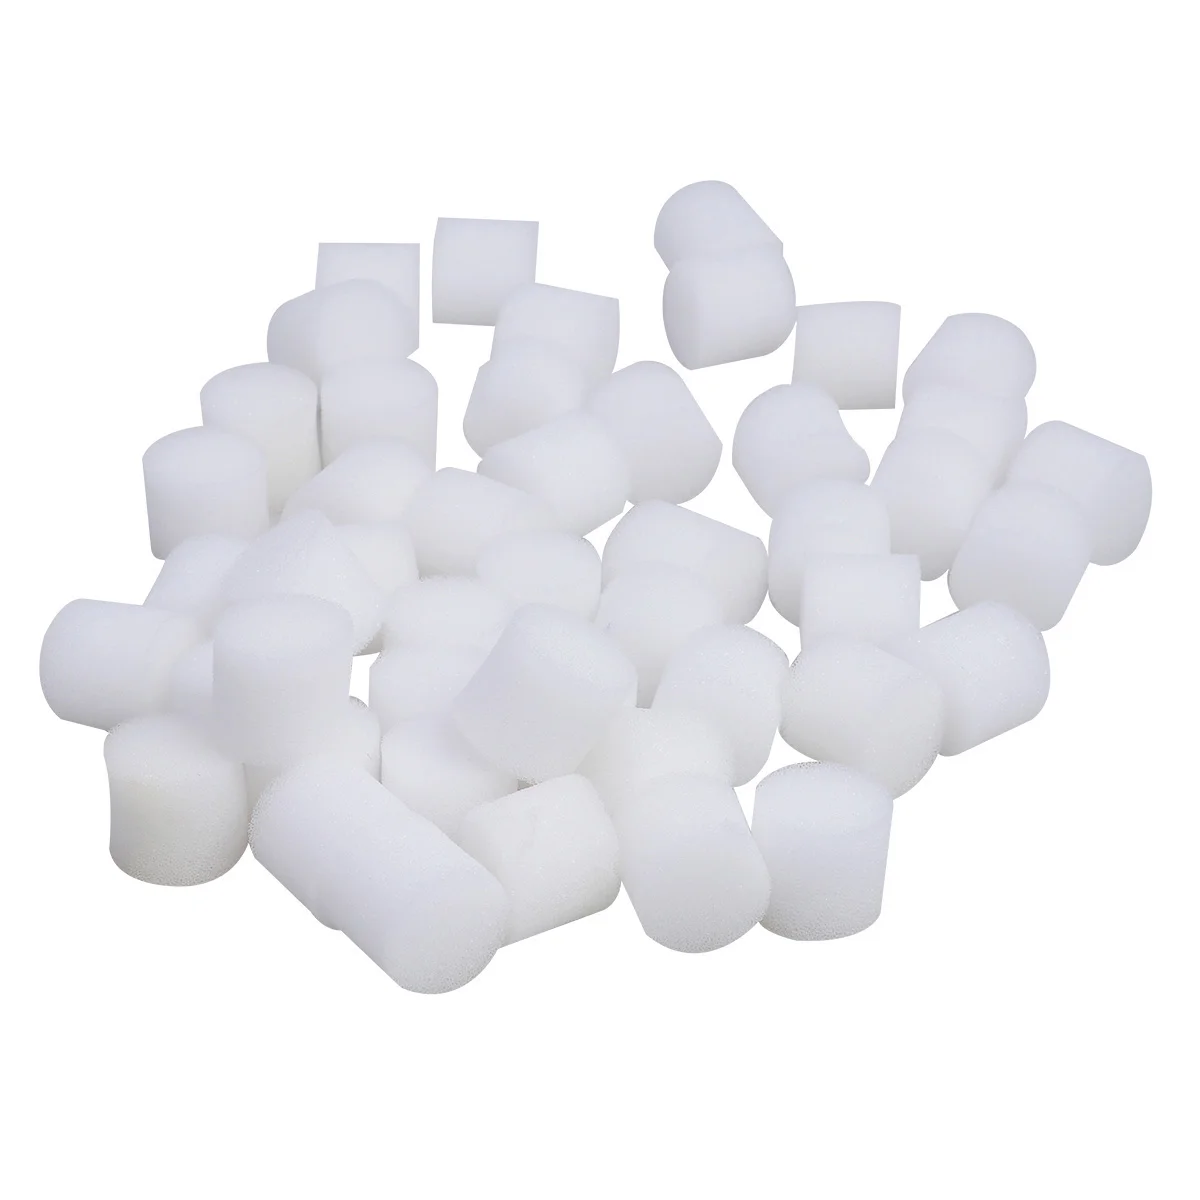 

200pcs Hydroponic Sponge Growing Media Cylindric Sponges Cube 30mm for Net Cup Pots Basket for Propagation Starting ( White )